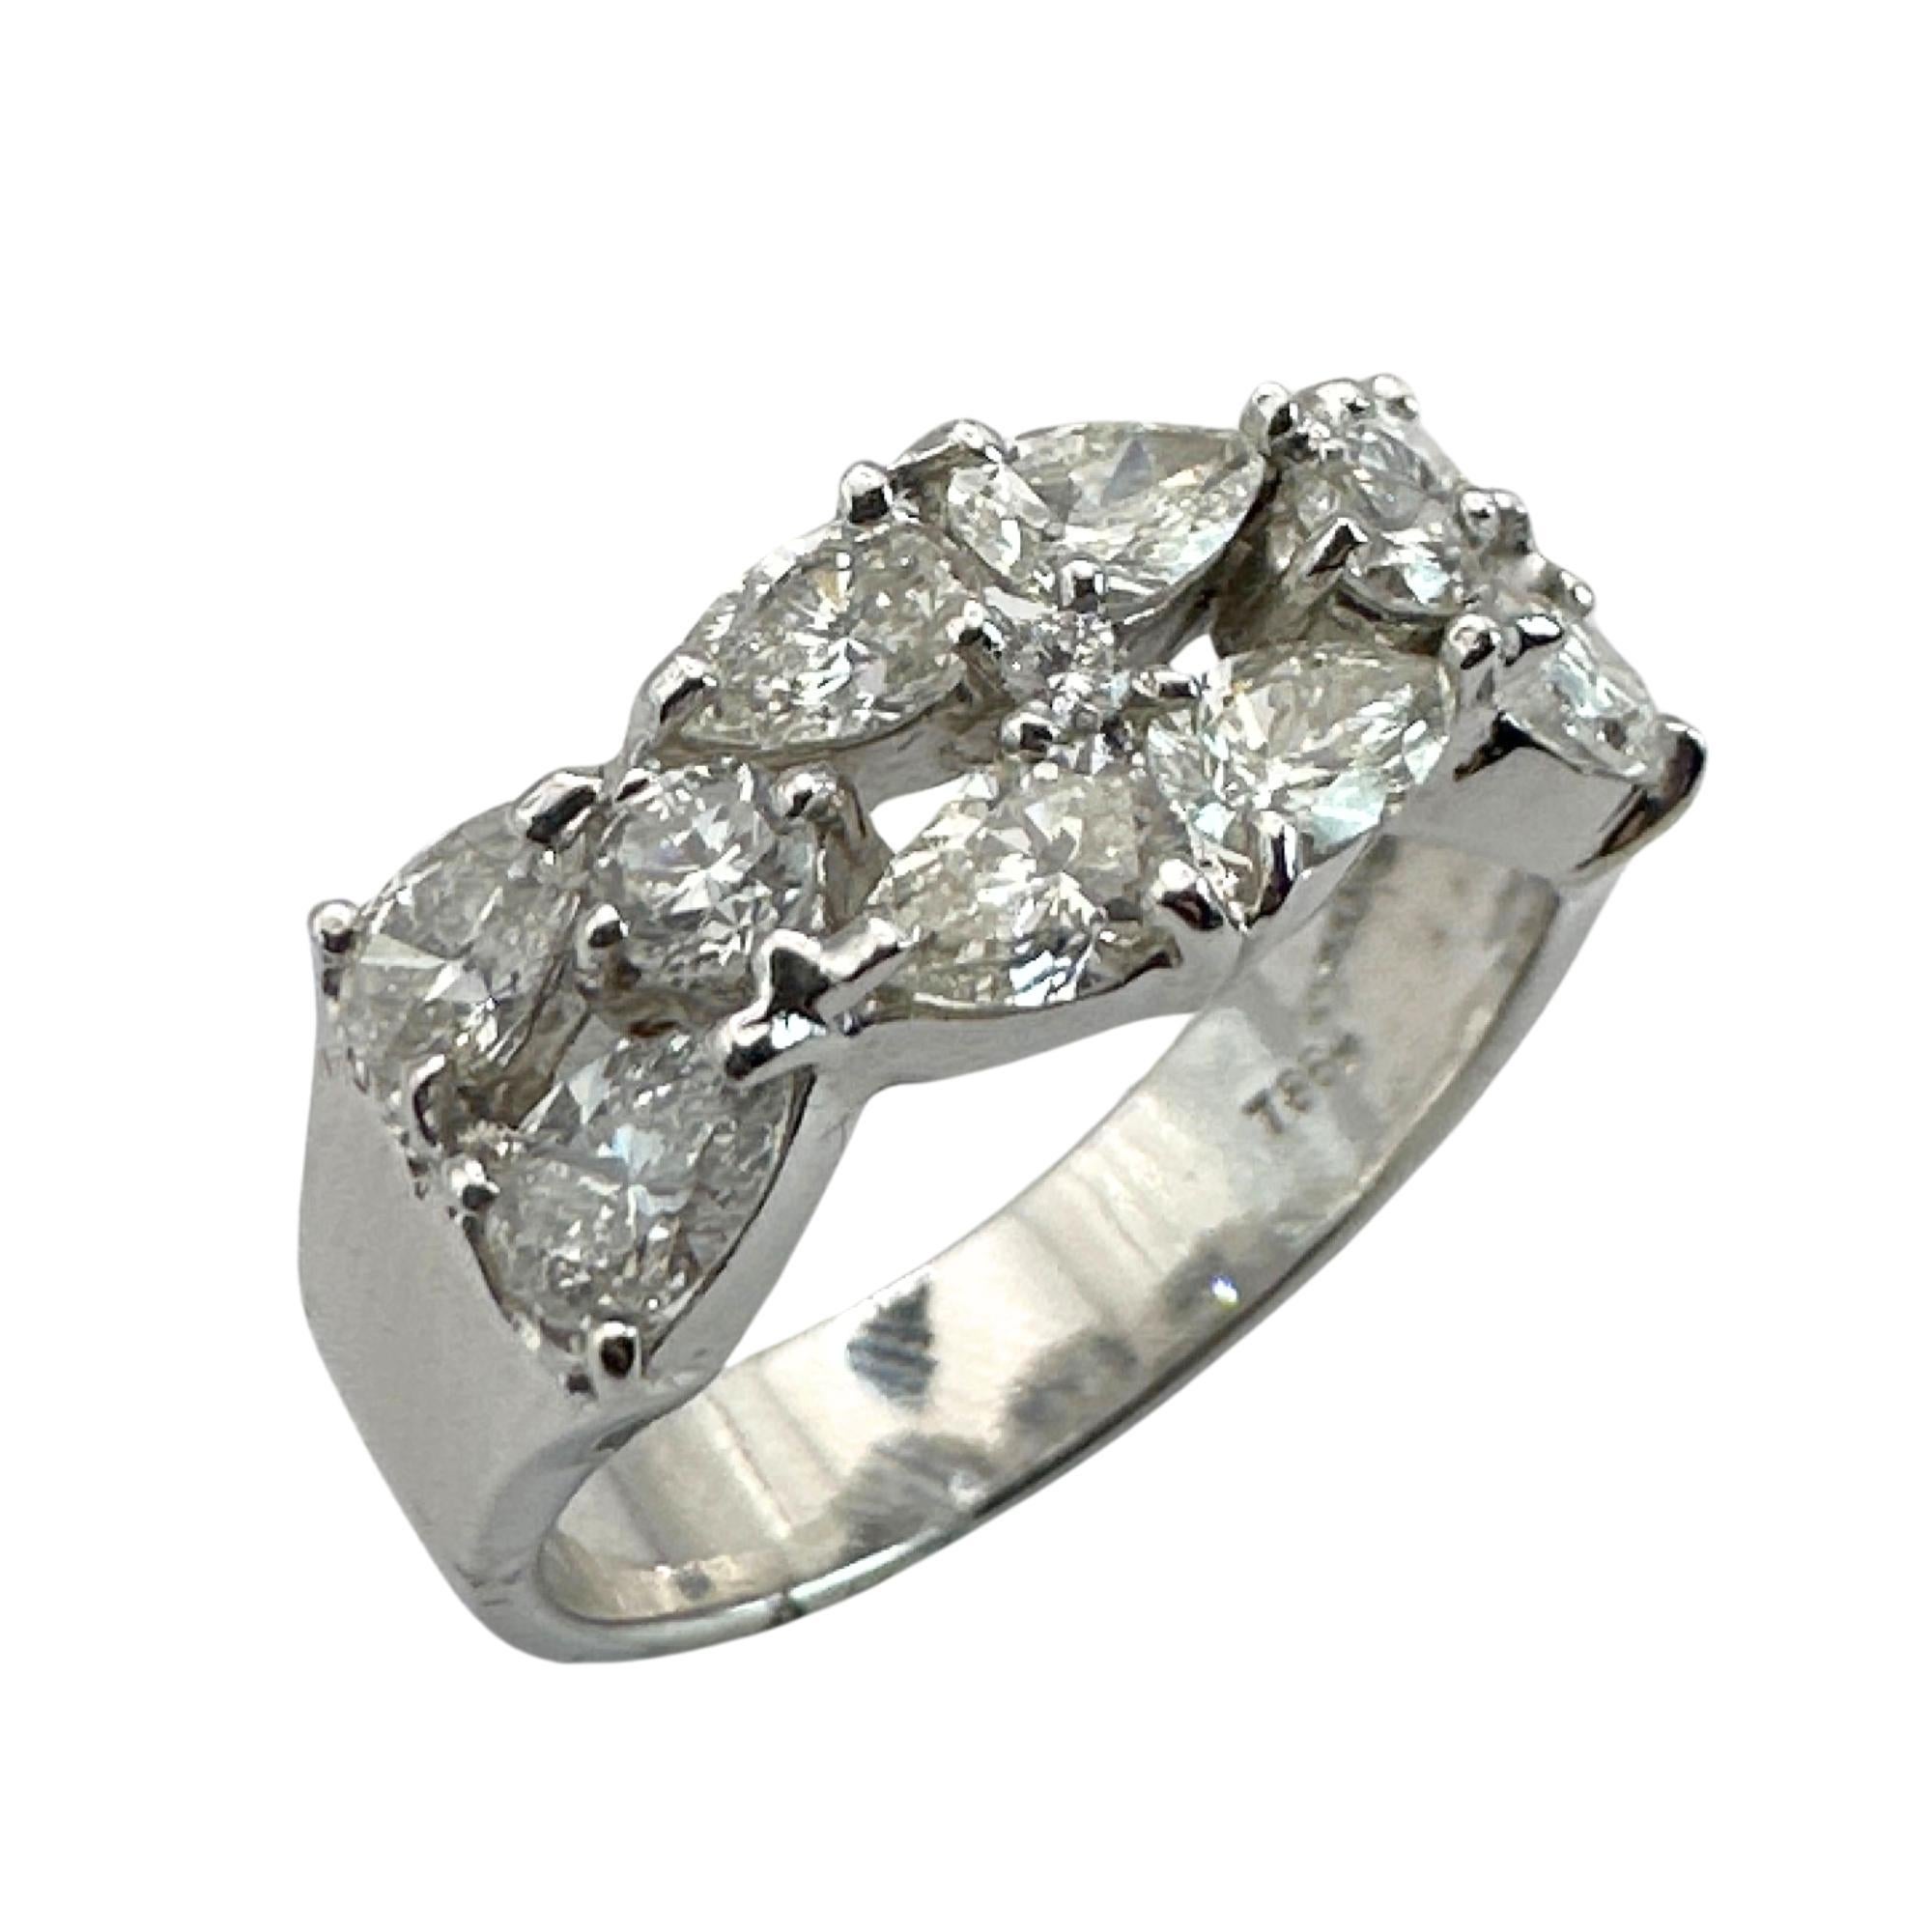 Indulge in luxurious elegance with this 18k White Gold Pear Shaped Diamond Band. Impeccably crafted with 1.85 carats of sparkling diamonds, this ring boasts a 13.18mm width. Adorned with intricate 